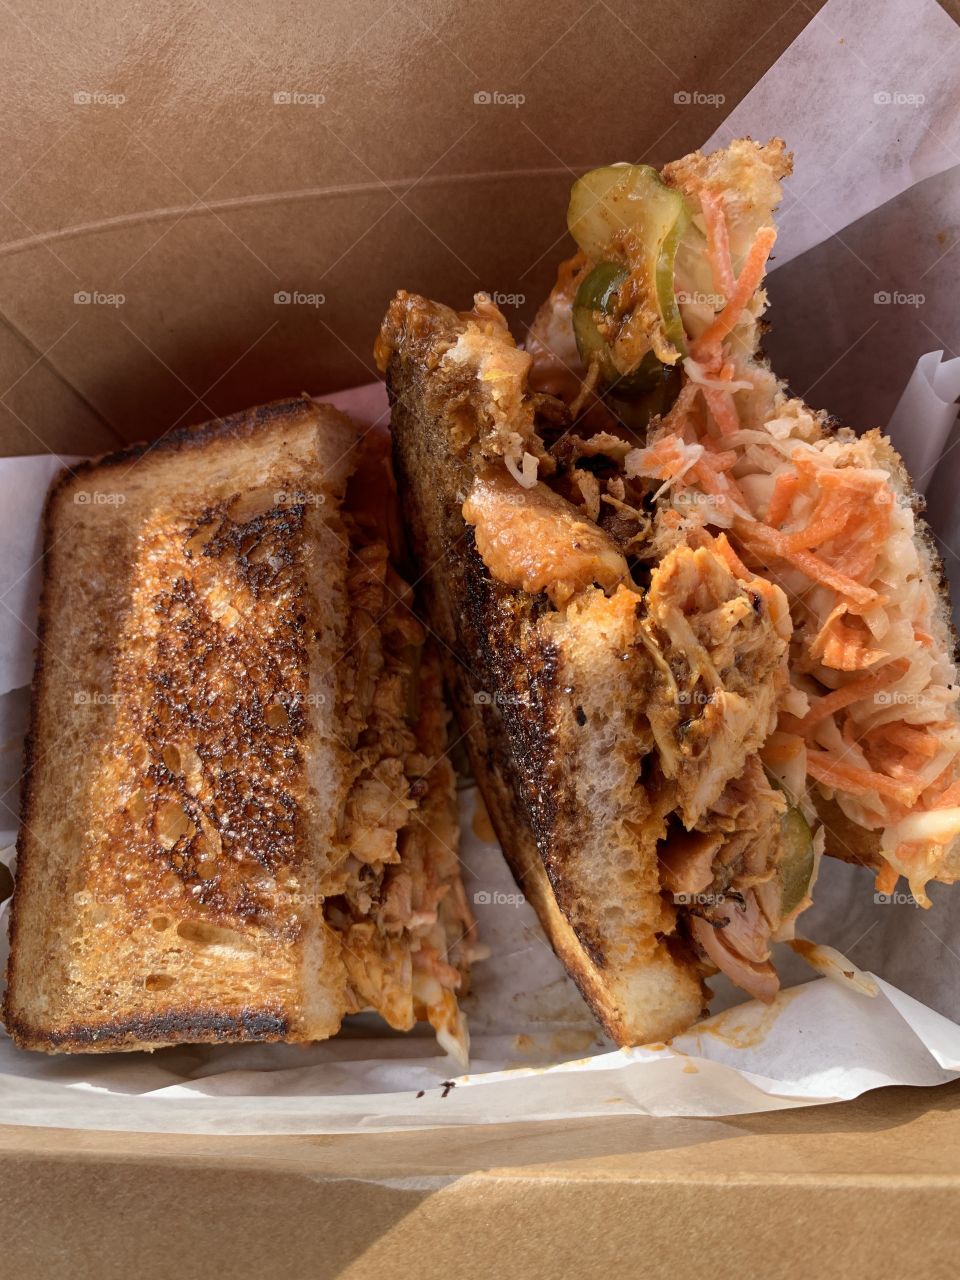 Smoked chicken sandwich from a food truck. 